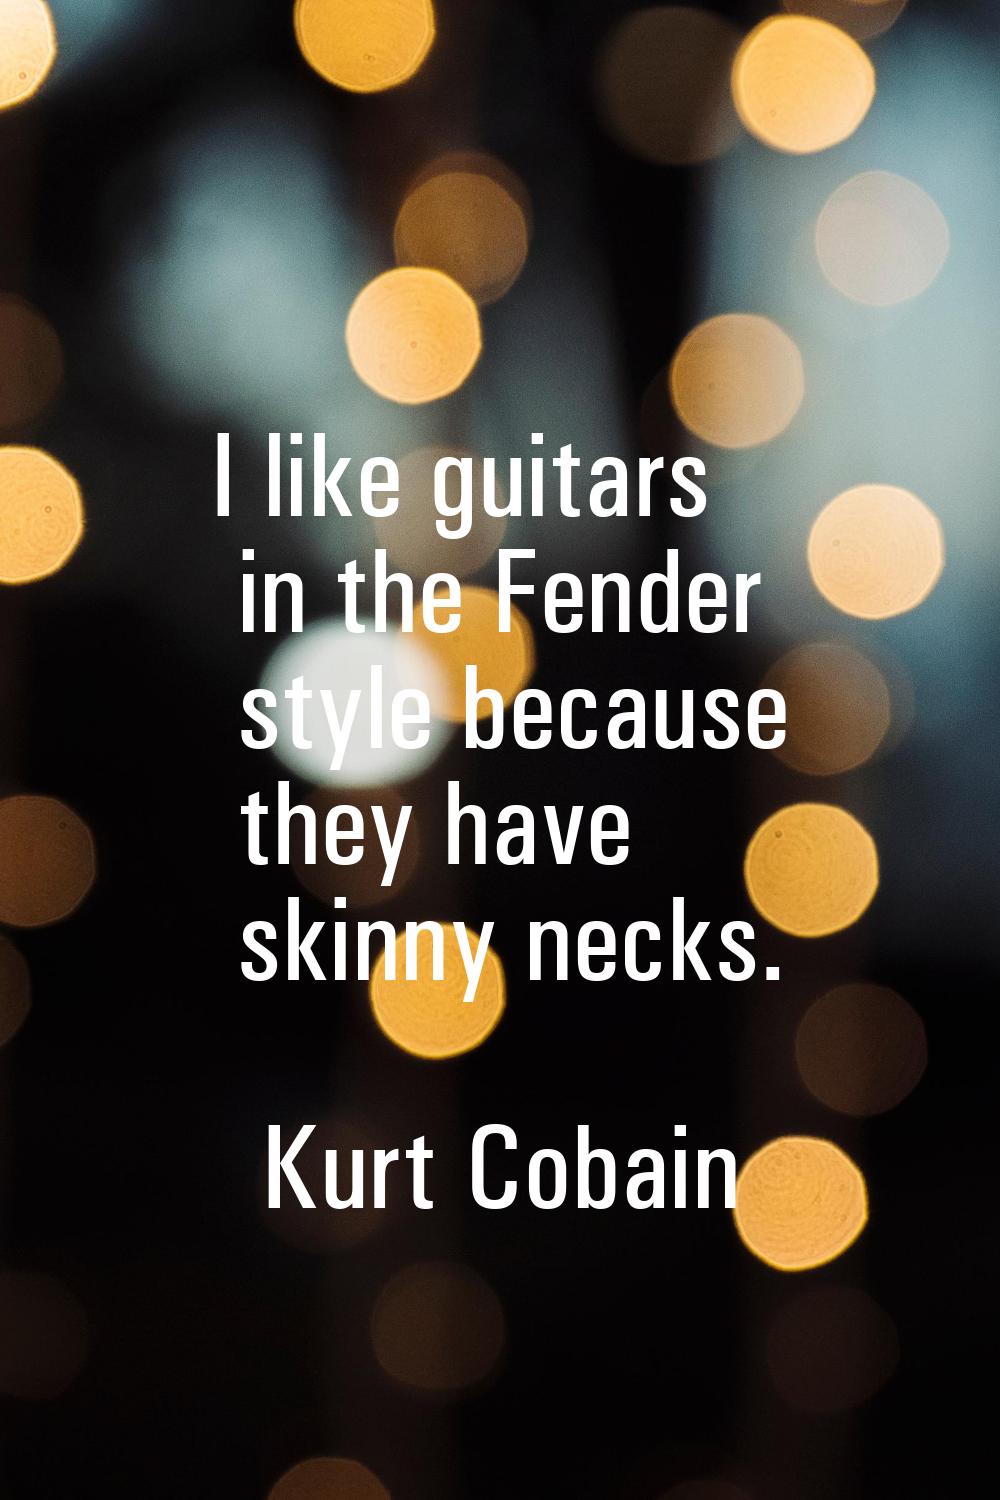 I like guitars in the Fender style because they have skinny necks.